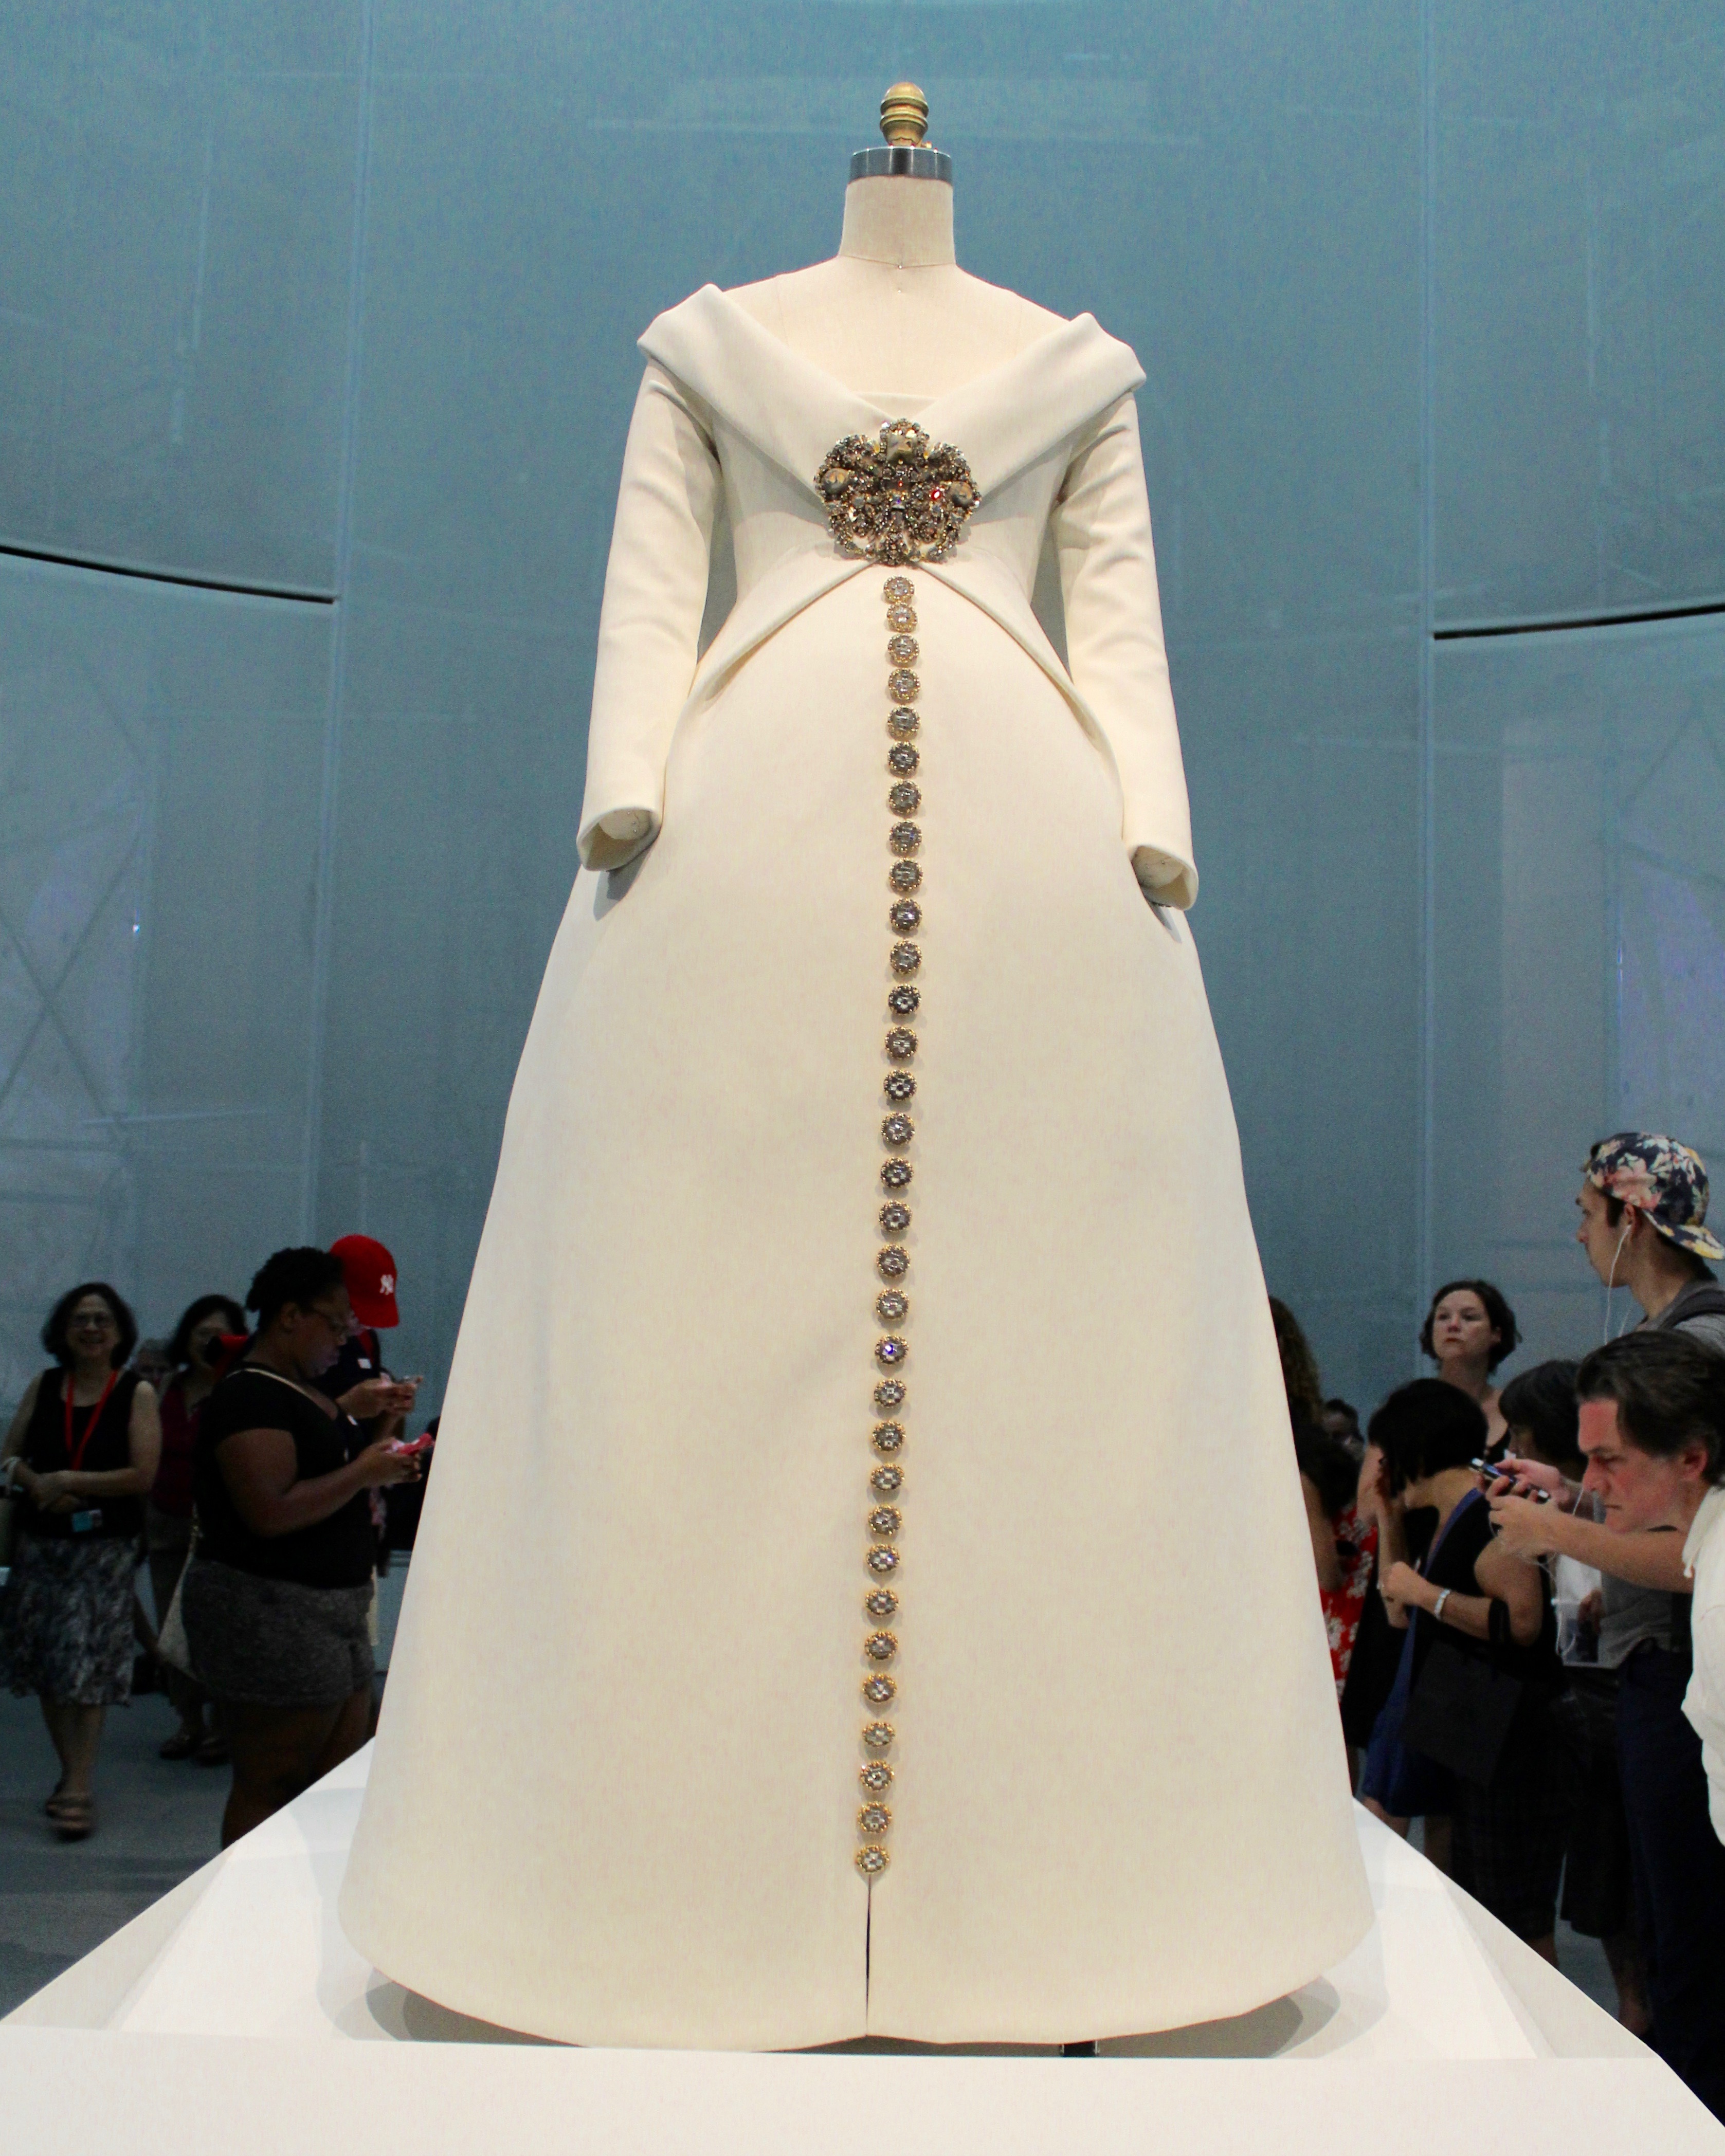 The front of the Karl Lagerfeld wedding dress at the 2016 Metropolitan Museum Costume Institute's Manus x Machina exhibit.